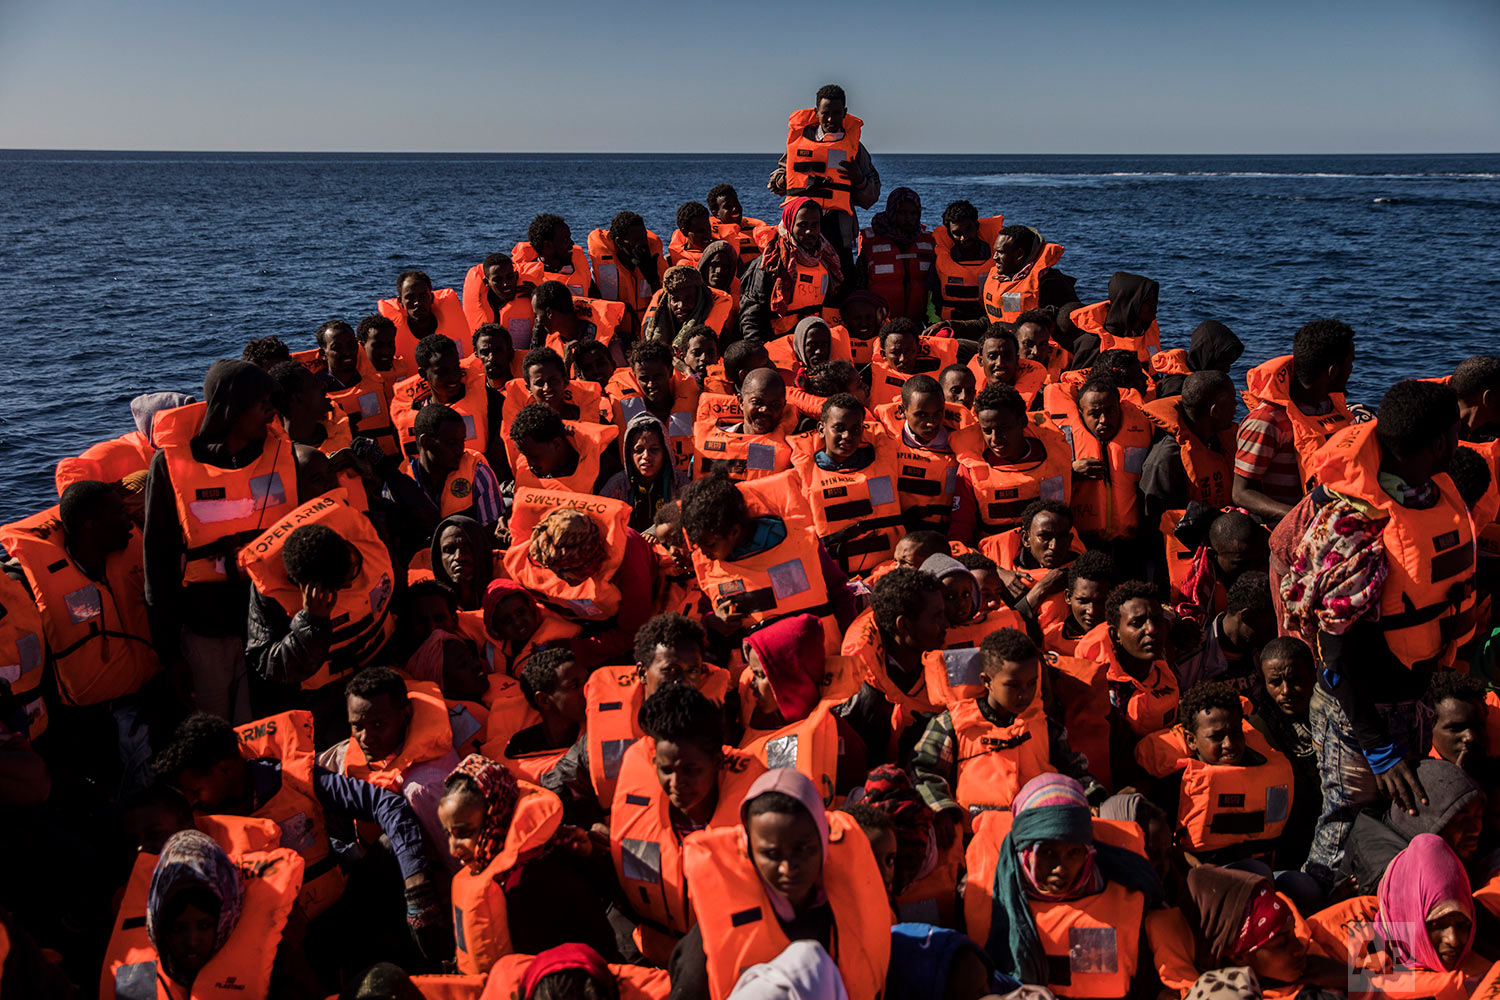  In this Tuesday, Jan. 16, 2018 photo, about 450 Sub-Saharan refugees and migrants, mostly from Eritrea, wait to be rescued by aid workers of Spanish NGO Proactiva Open Arms, as they were trying to leave the Libyan coast and reach European soil aboard an overcrowded wooden boat, 34 miles north of Kasr-El-Karabulli, Libya. (AP Photo/Santi Palacios)&nbsp; |&nbsp; See these photos on AP Images  